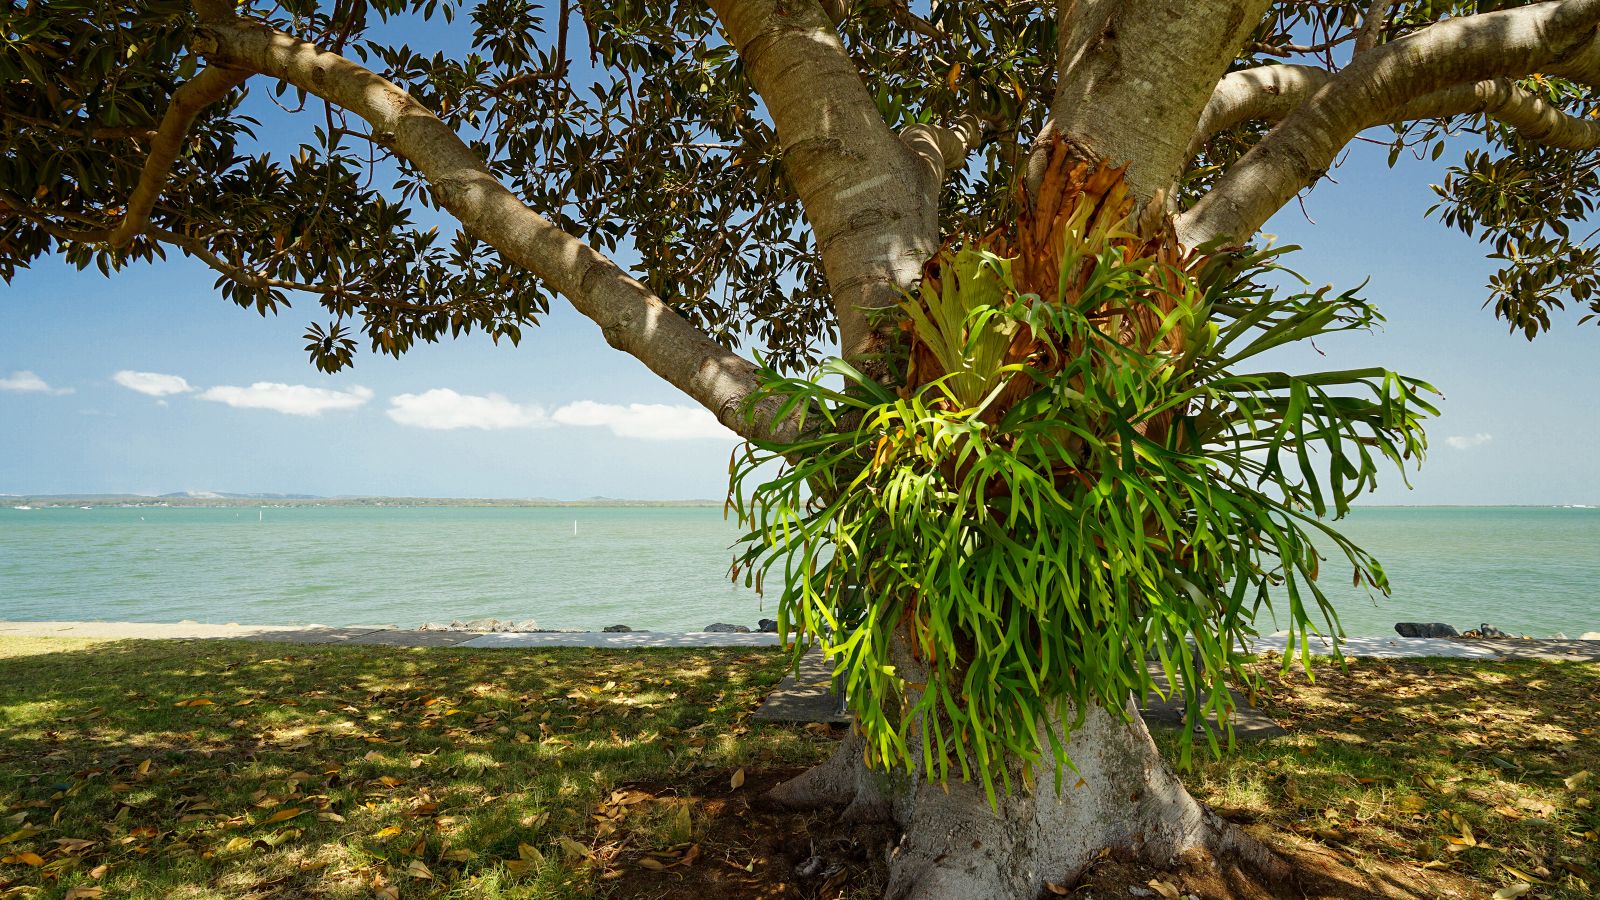 Staghorn fern growing on a tree at a beach